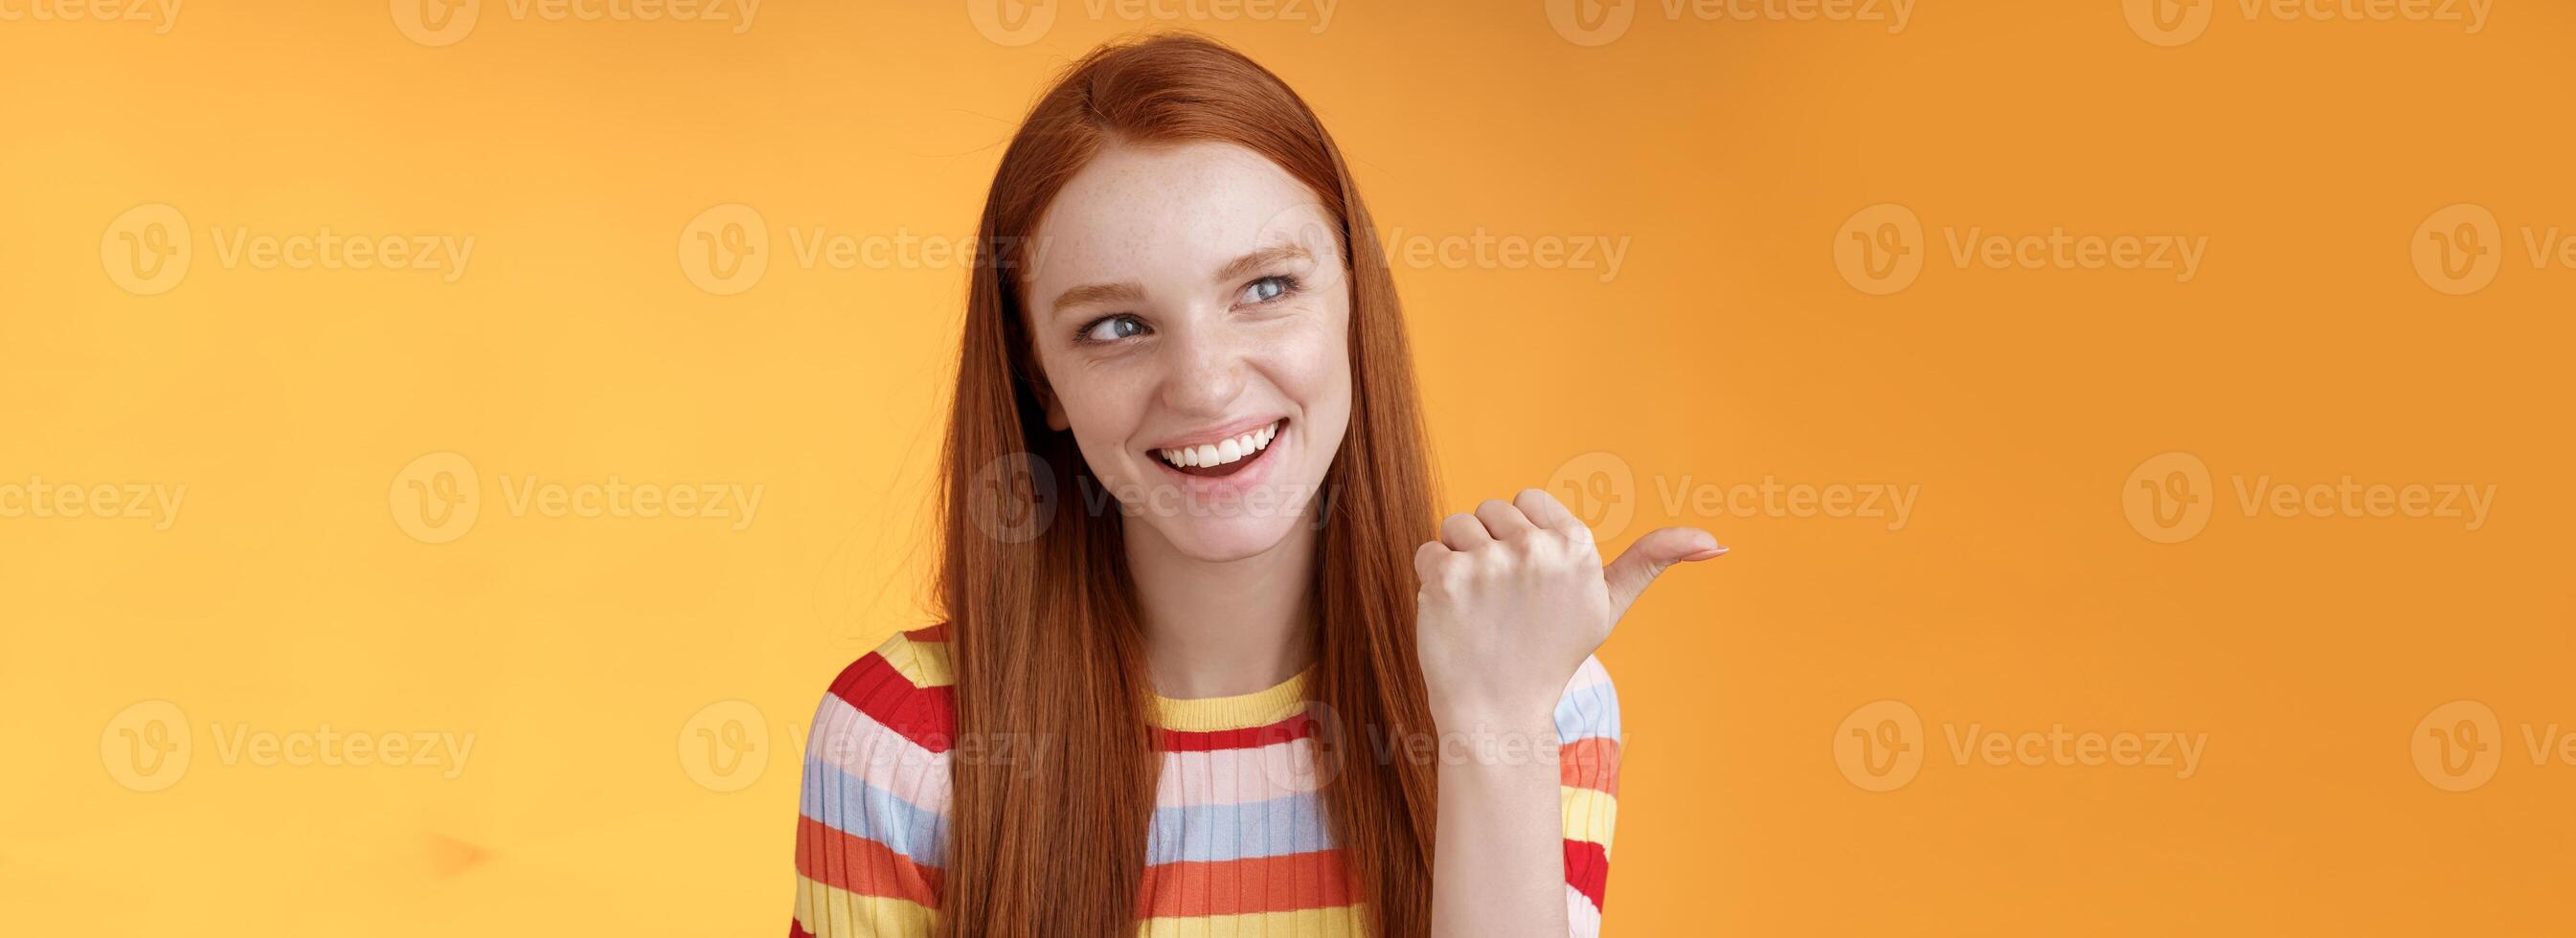 Amused outgoing redhead stylish female student discuss girly things smiling cheeky pointing handsome guy smirking devious pointing thumb looking intrigued curiously staring orange background photo